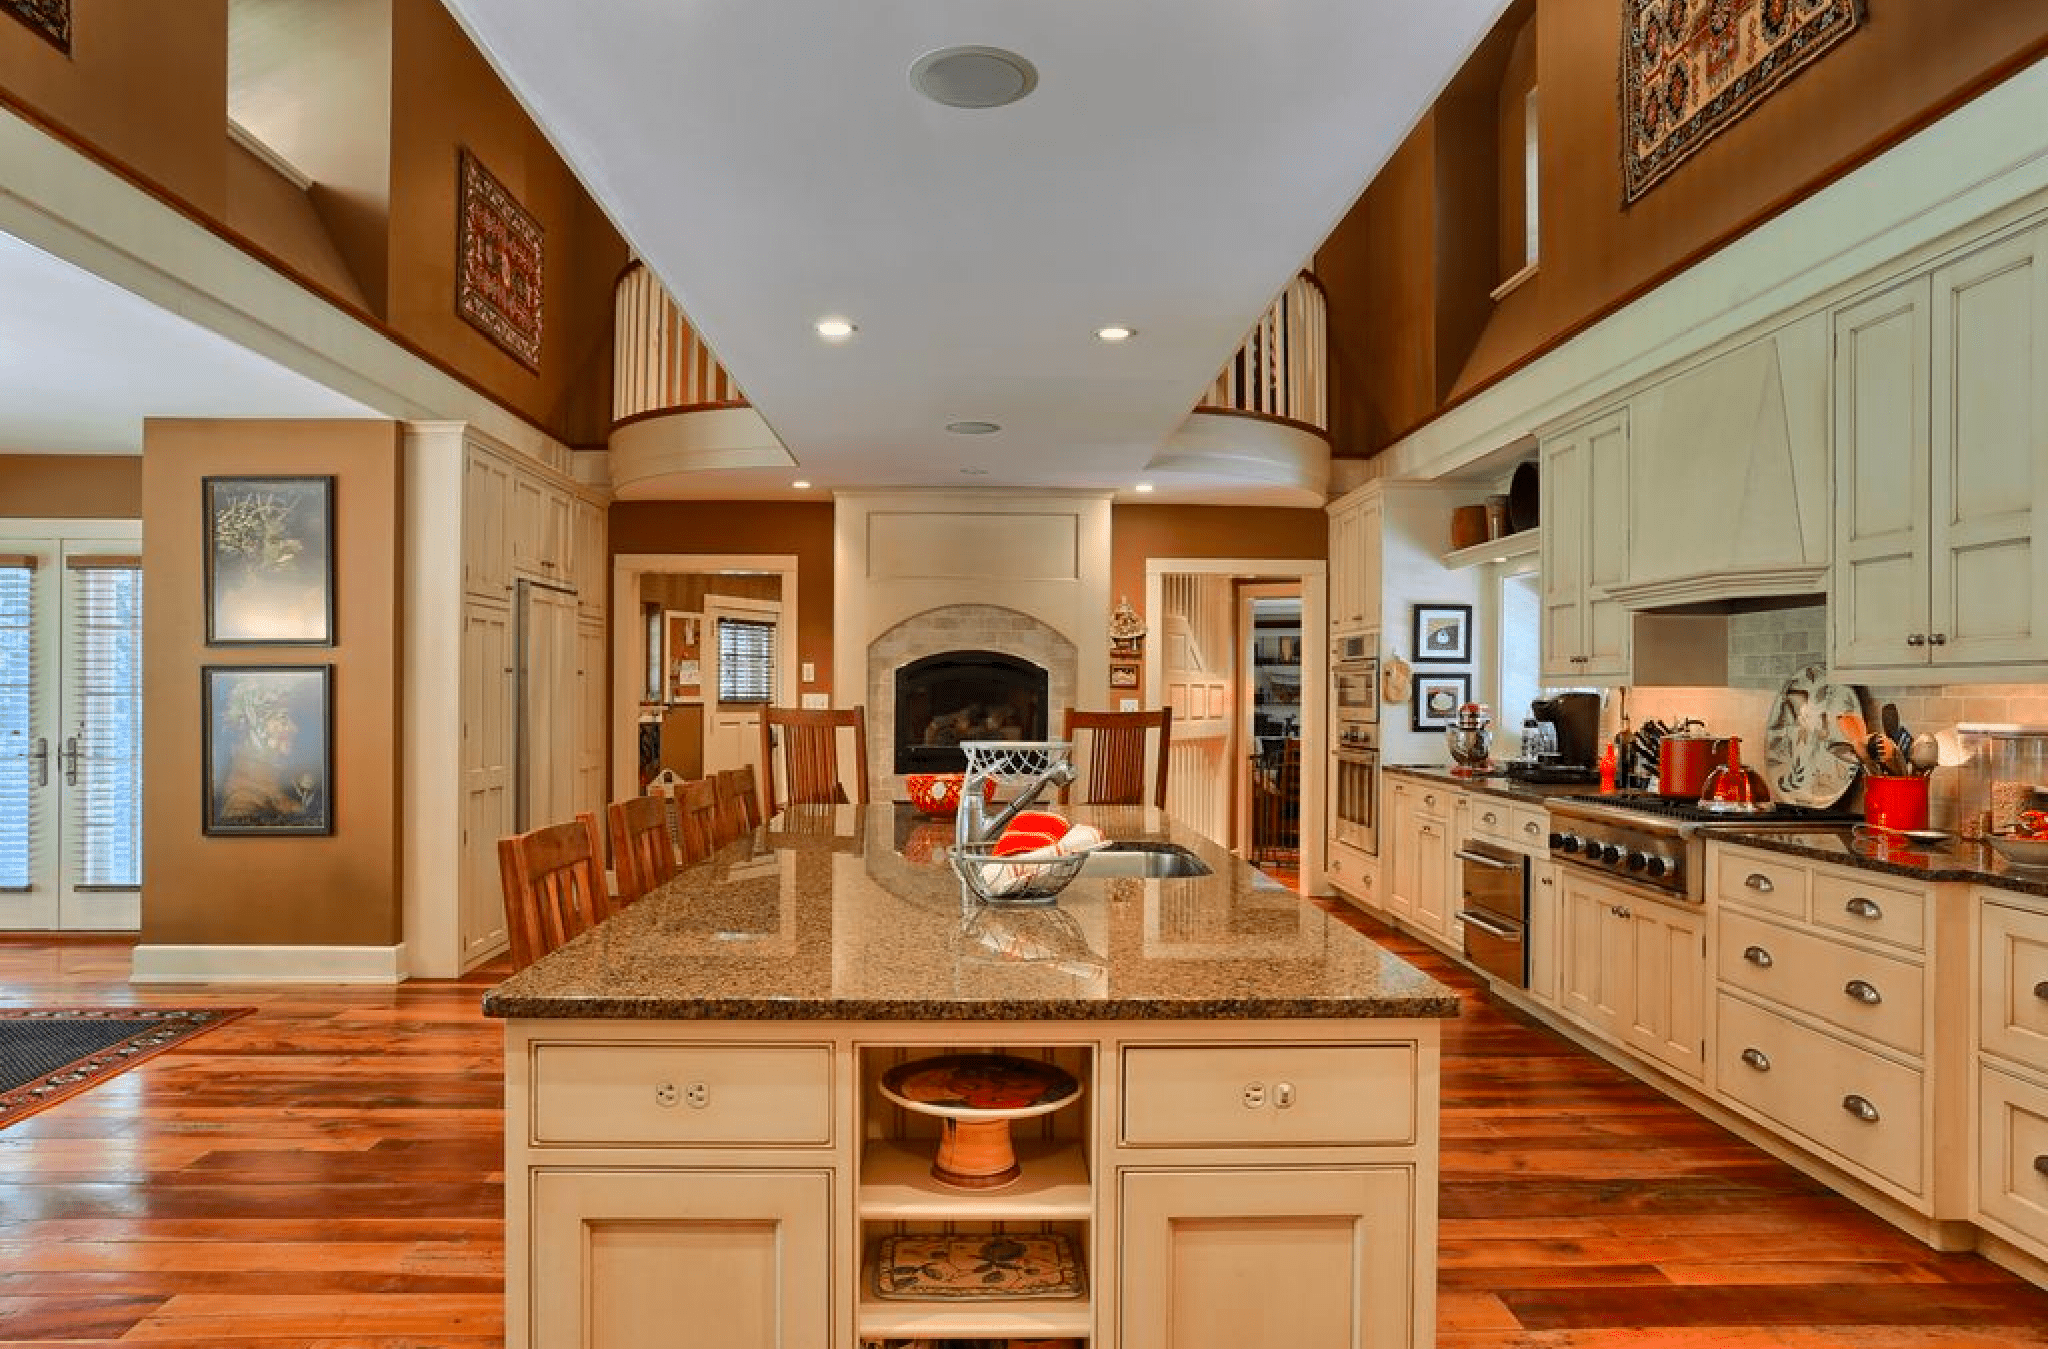 Kitchen island lined up with fireplace